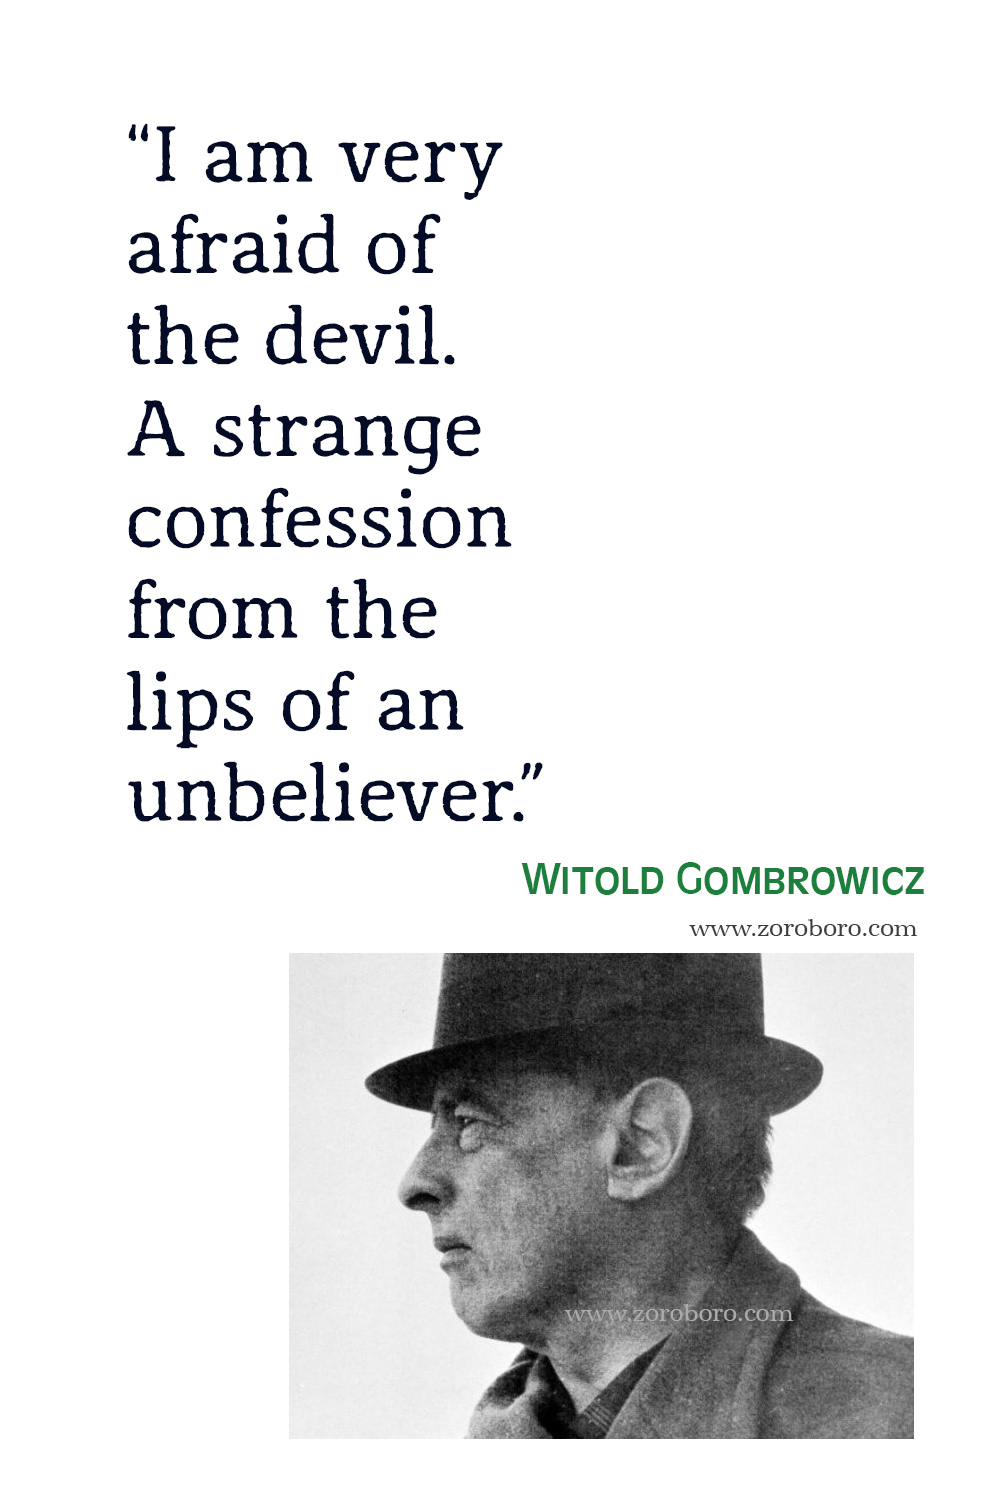 Witold Gombrowicz Quotes, Witold Gombrowicz Ferdydurke, Cosmos Quotes, Witold Gombrowicz Books, Witold Gombrowicz Quotes.